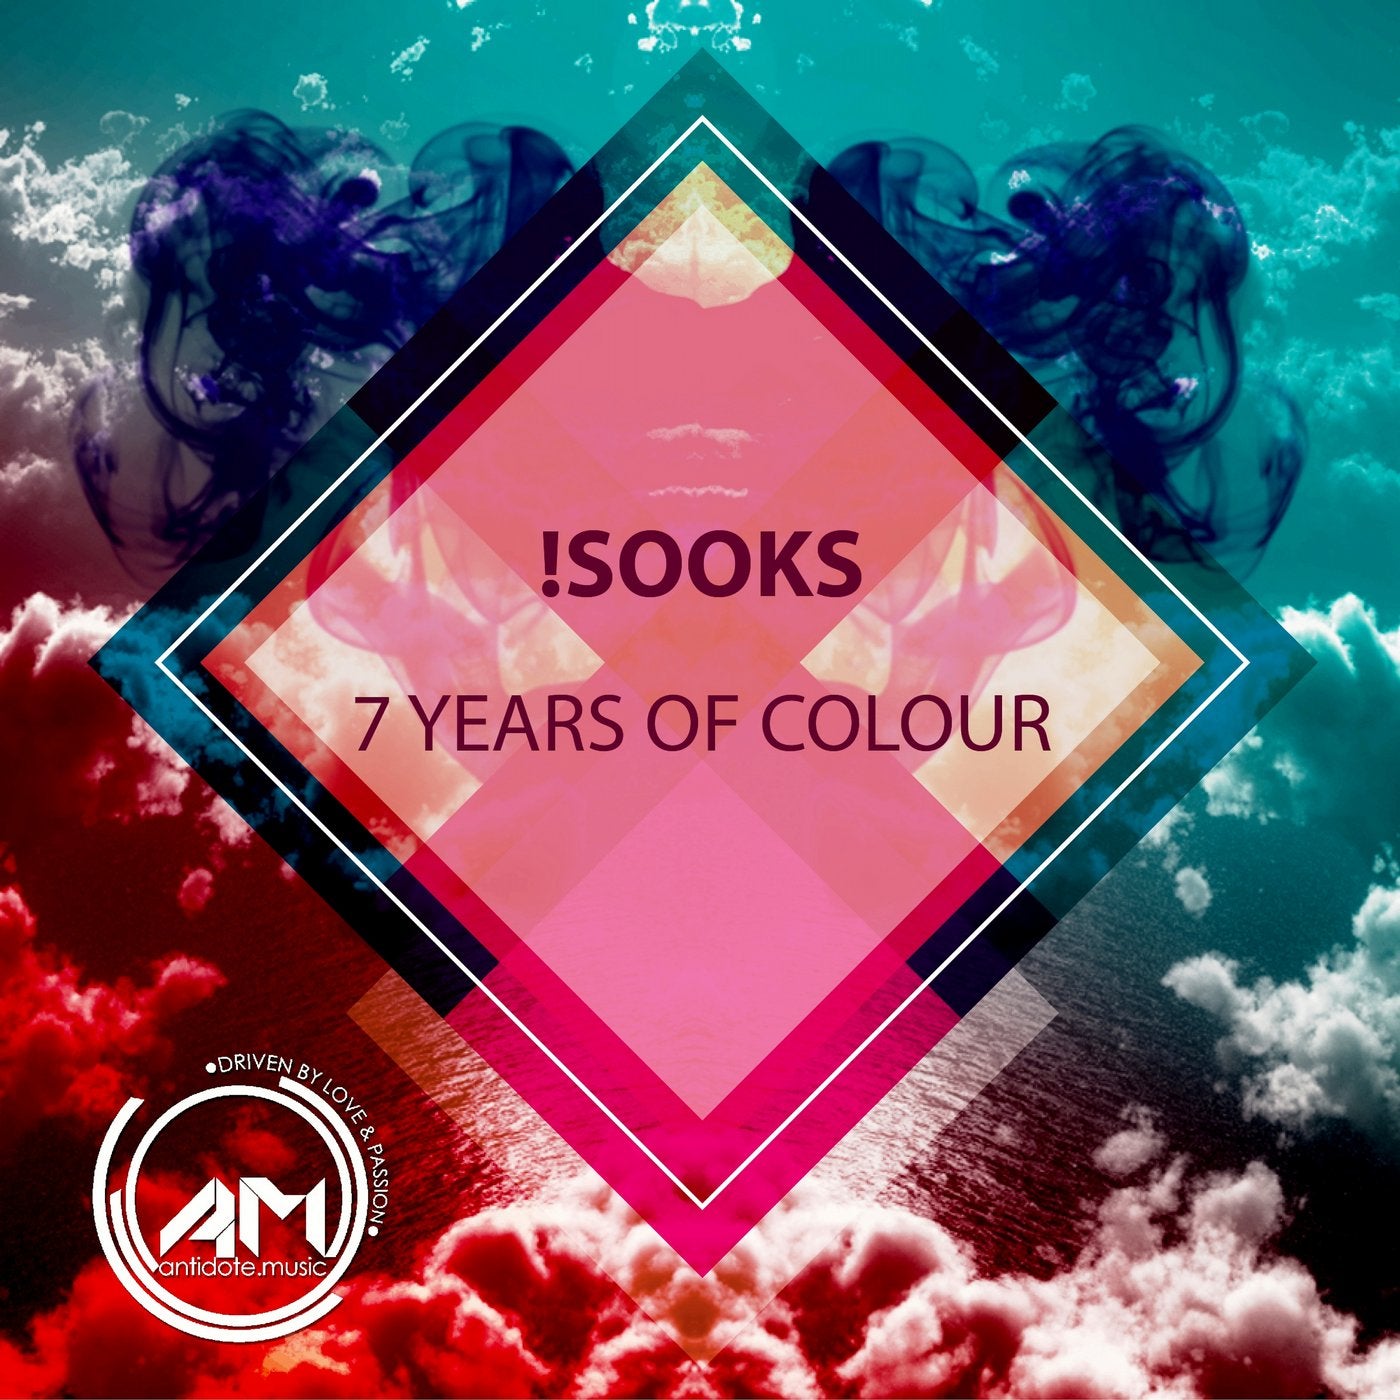 7 Years of Colour